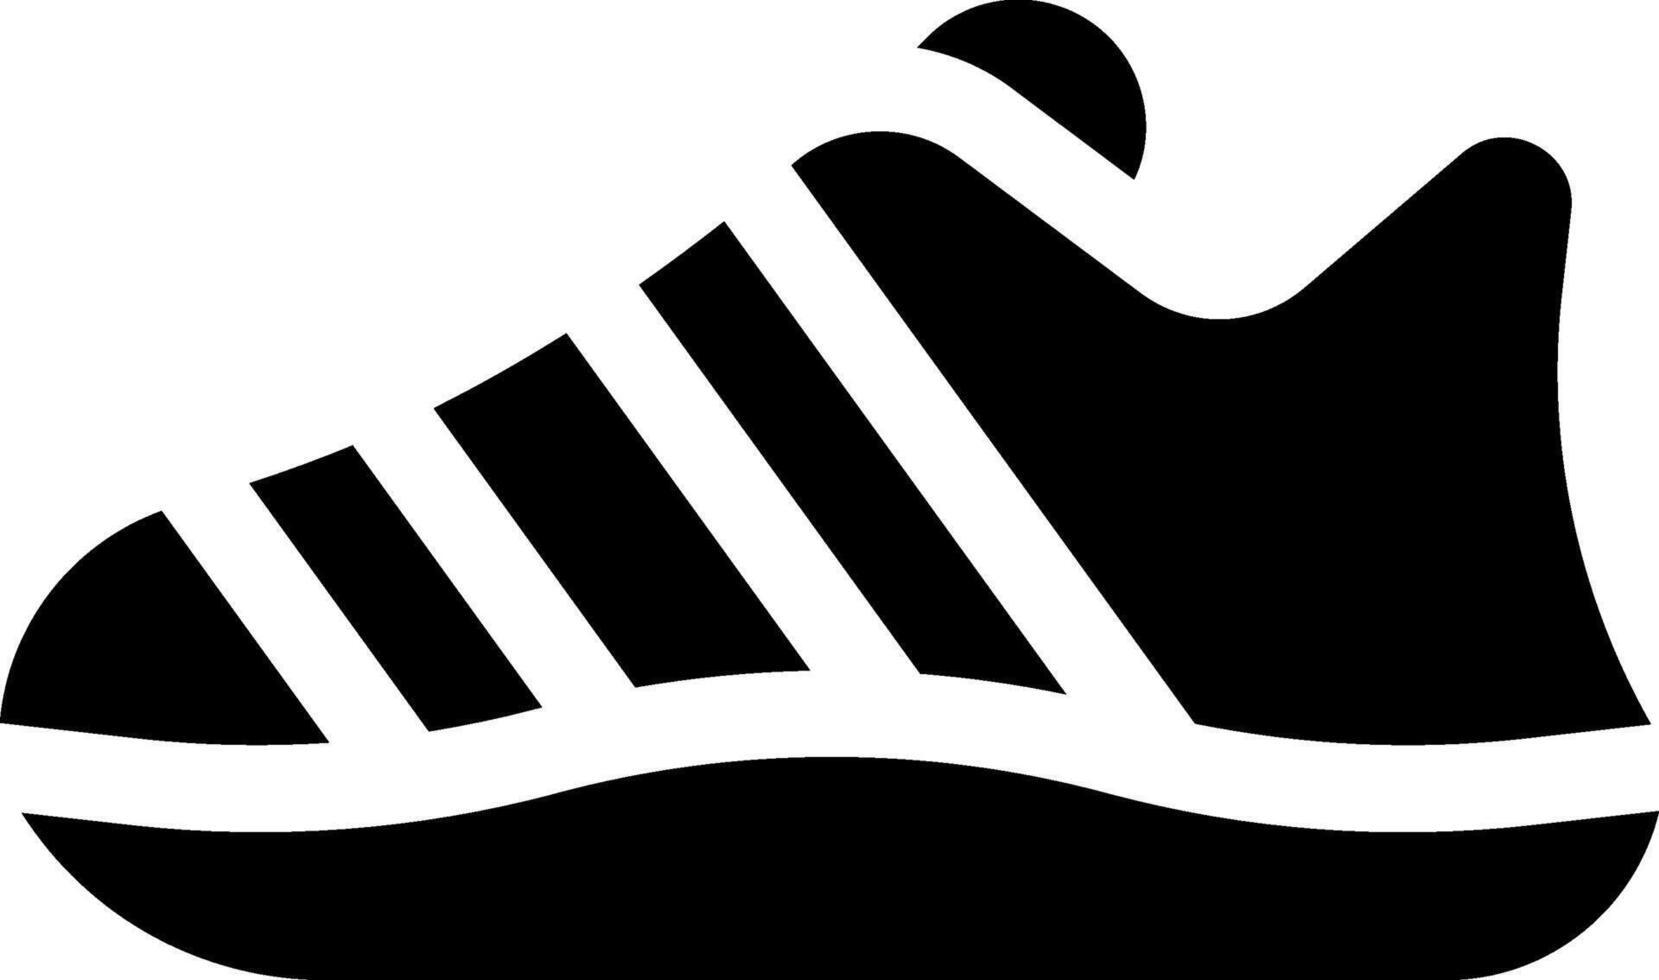 this icon or logo shoes icon or other where it explaints various types of shoes that have different uses, such as sports shoes and others or design application software vector